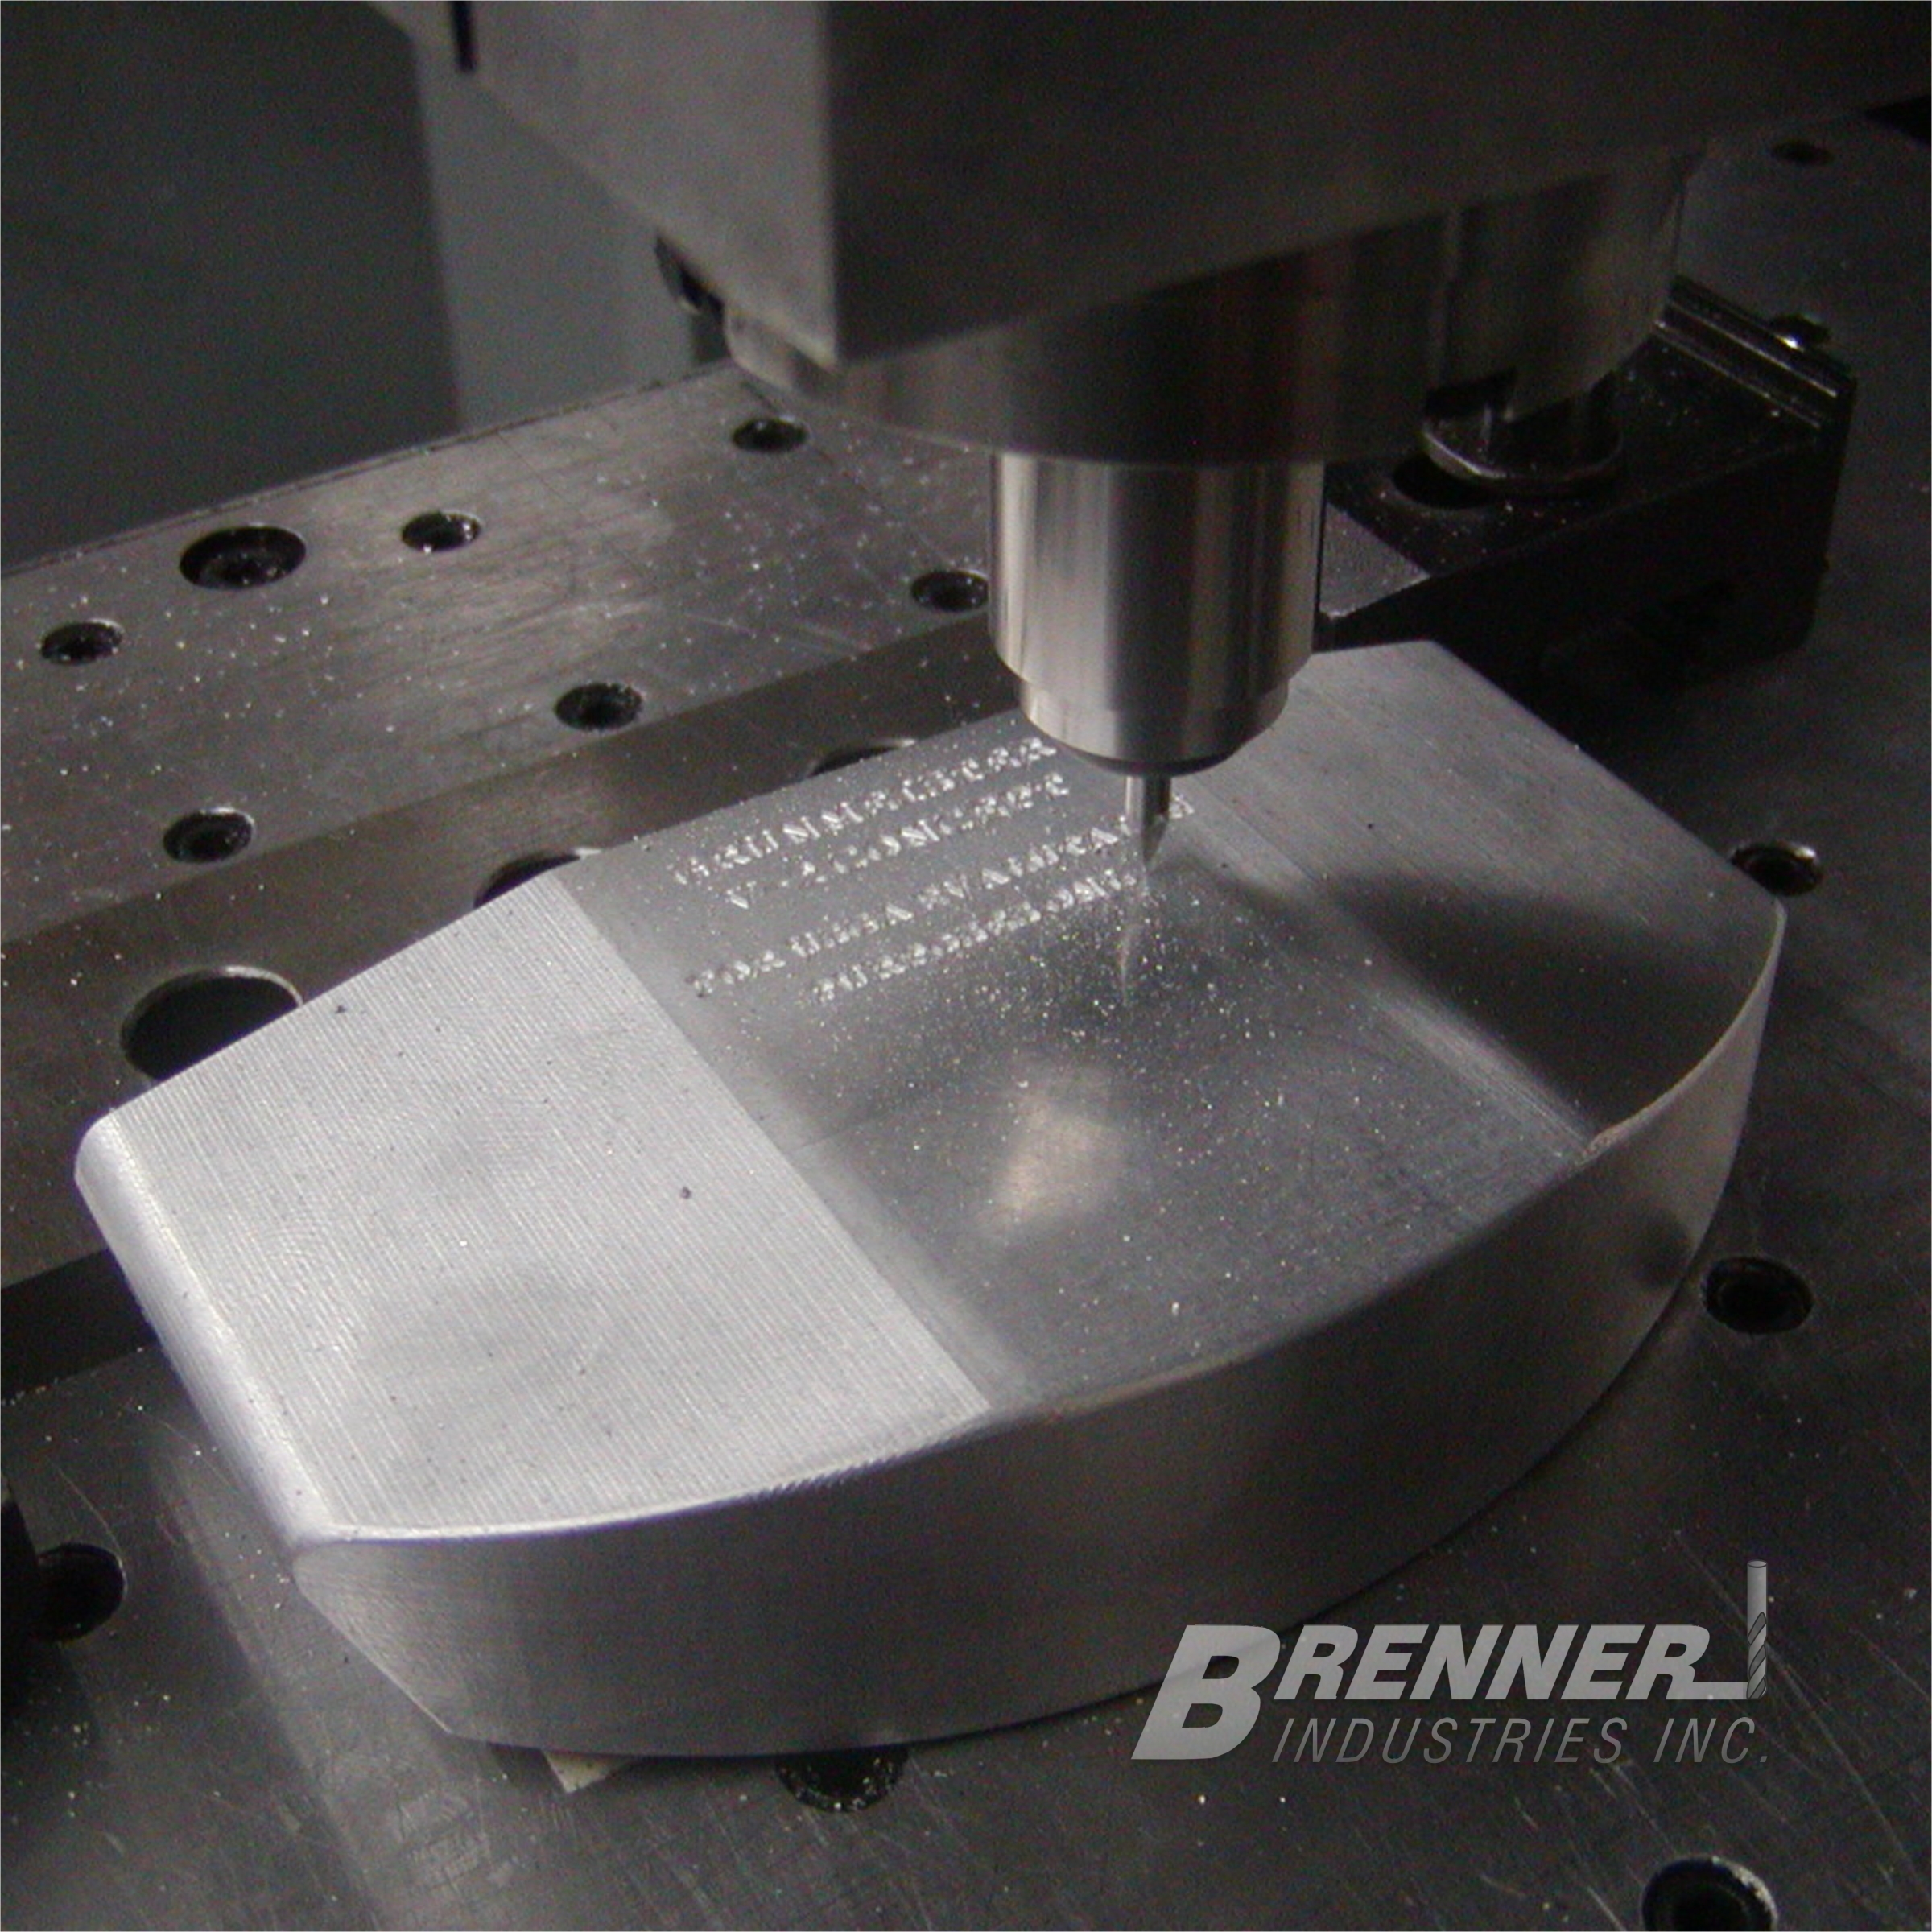 part marking electrode engraving Brenner Industries Industrial Mold Die Tool Stamping Machining Engraving Engravers Service Texture Polish Insert Inserts Components Plastic Injection Forming Metal Working Forging Cast Casting Castings Automotive Firearm Agricultural Cookware Marking Identification ID I.D. Part Number Logo Revision Brand Branding OEM Artwork Vector Company OEM O.E.M. Manufacturing Manufacturers Association Guild CNC EDM mill milling milled Hardened tool steel CMP PM A2 D2 S7 M4 A-2 D-2 S-7 M-4 DC-53 DC53 rapid ton tonne tonnage press draw blank blanking tooling production high multiple cavity revision core pin pins ejector instruction instructions communication communications words cutting cutter cutters hardmilling aluminum brass metal steel copper bronze work workers USA U.S.A. Milwaukee Wisconsin WI MKE Journeyman CAD CAM MasterCAM SolidWorks Master Solid 3D three dimensional modeling model direct